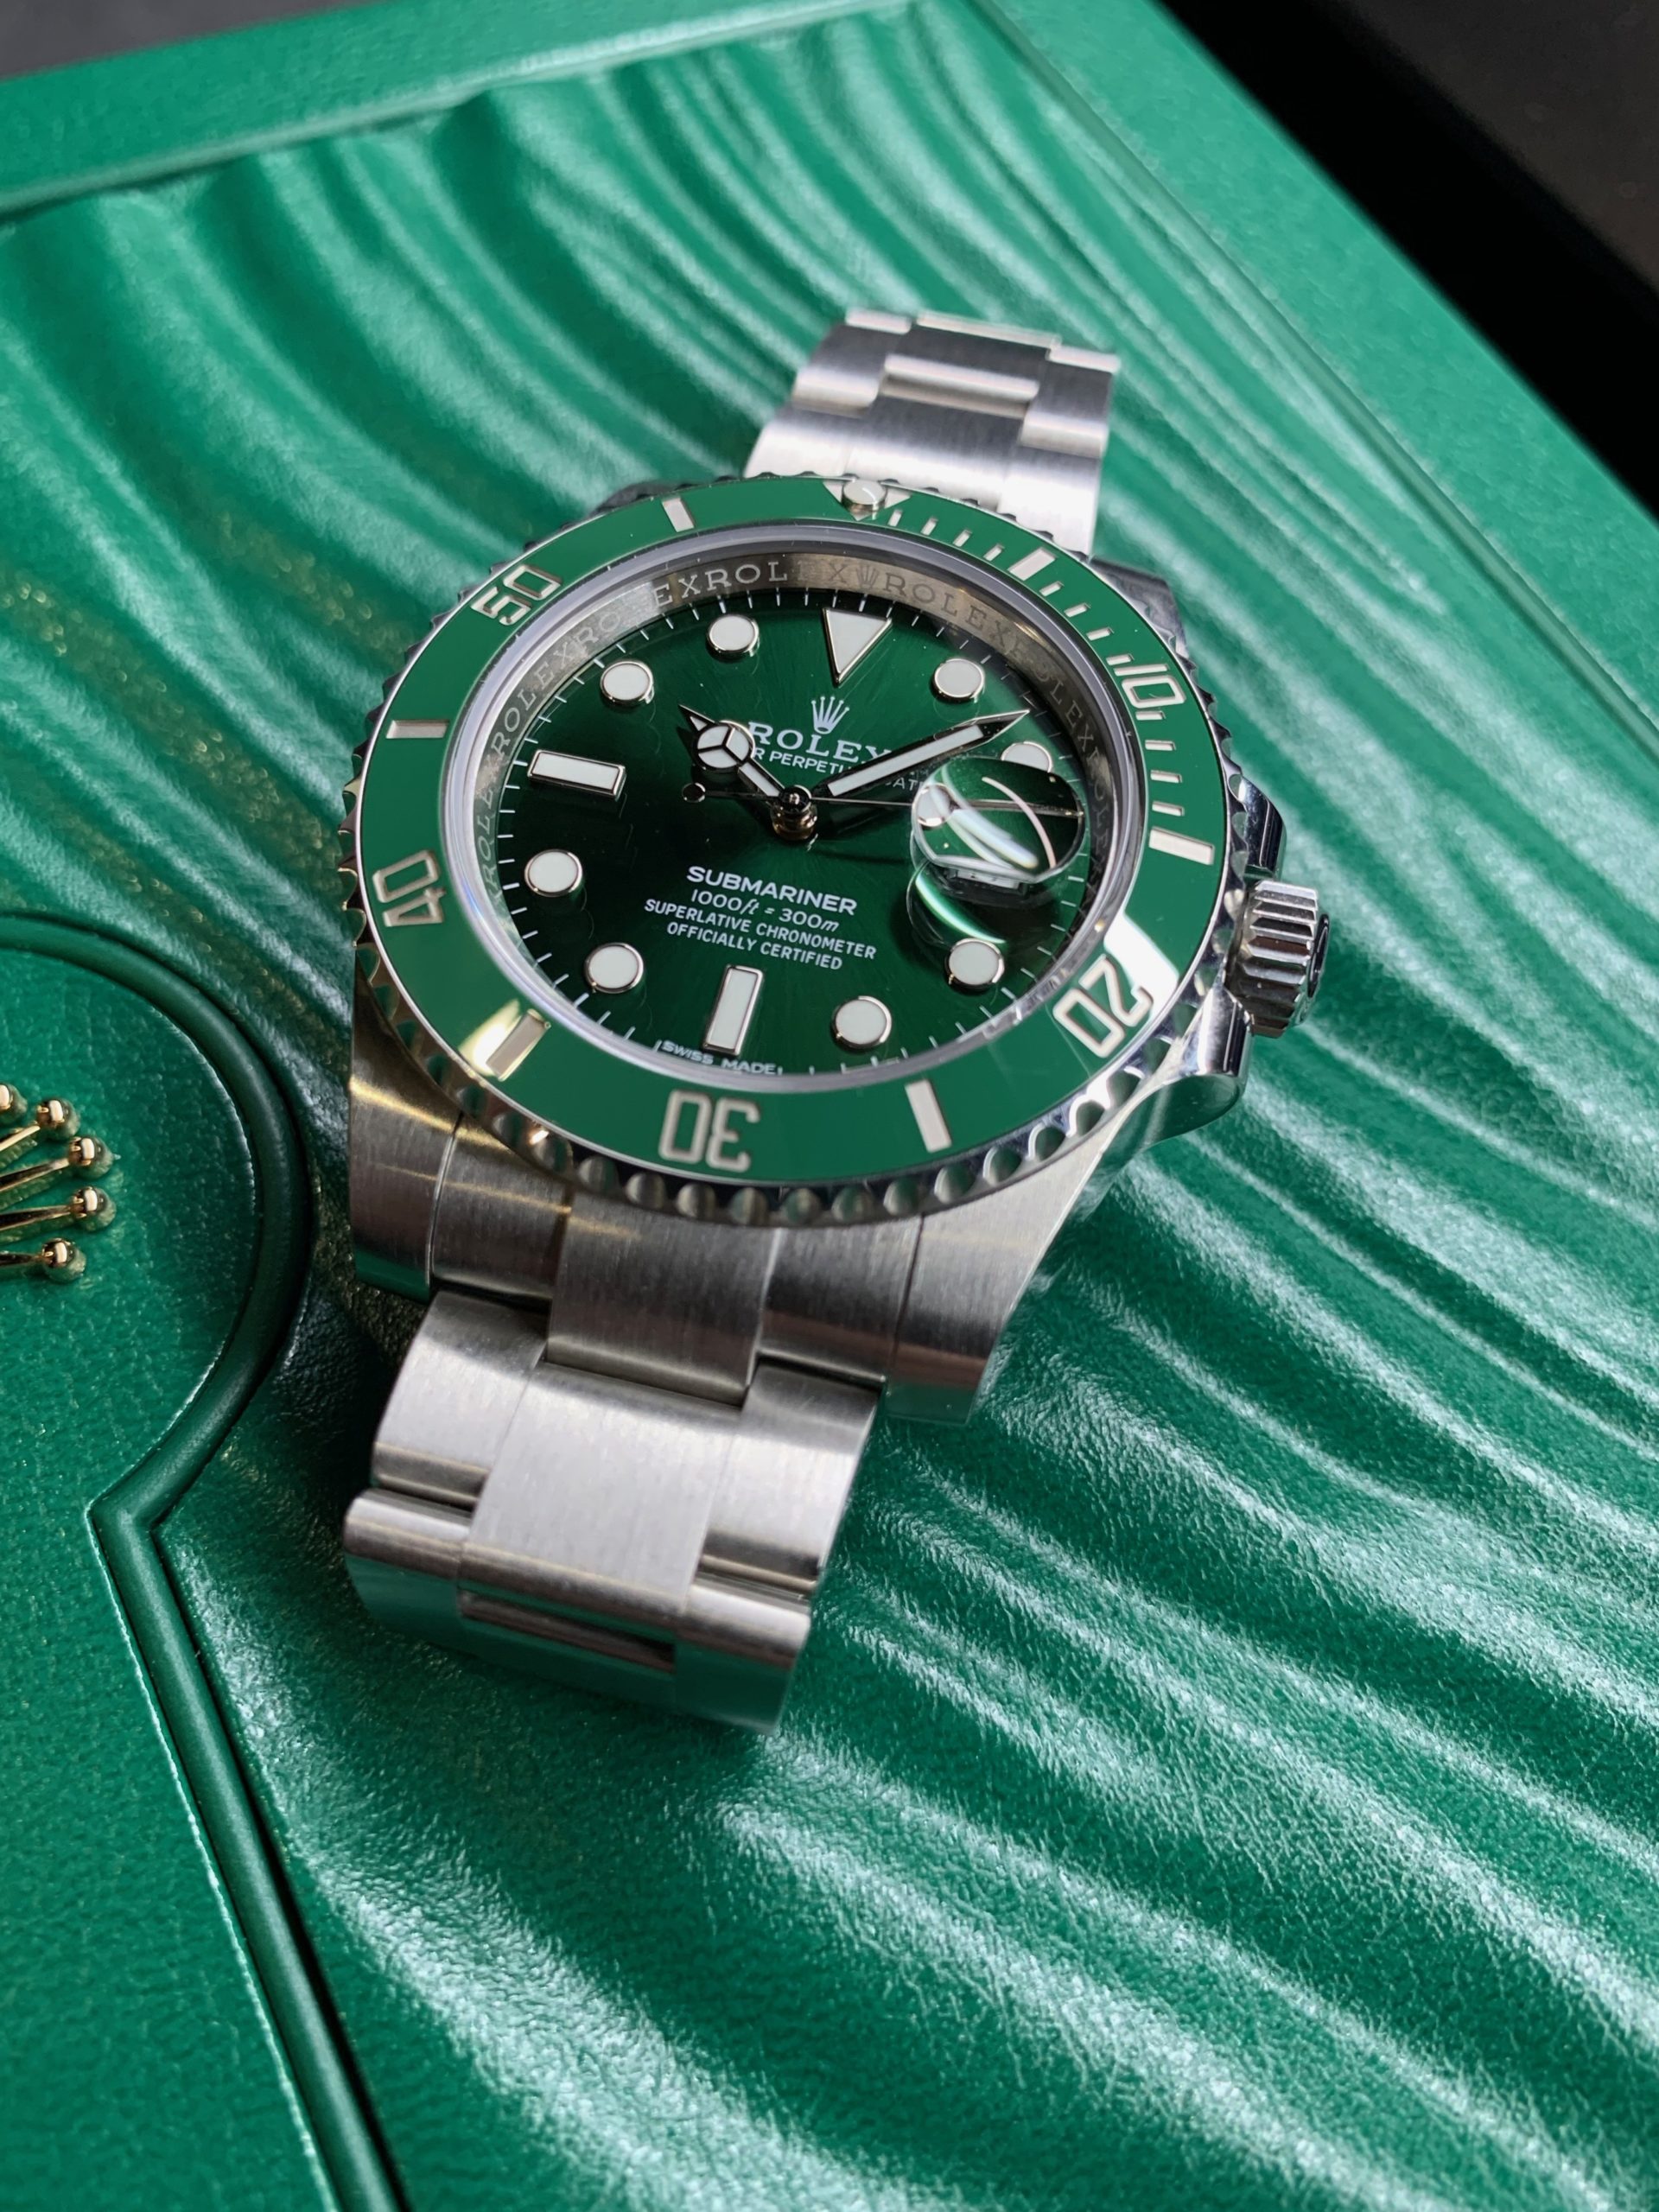 ROLEX HULK SUBMARINER GREEN DIAL AND BEZEL 116610LV Carr Watches